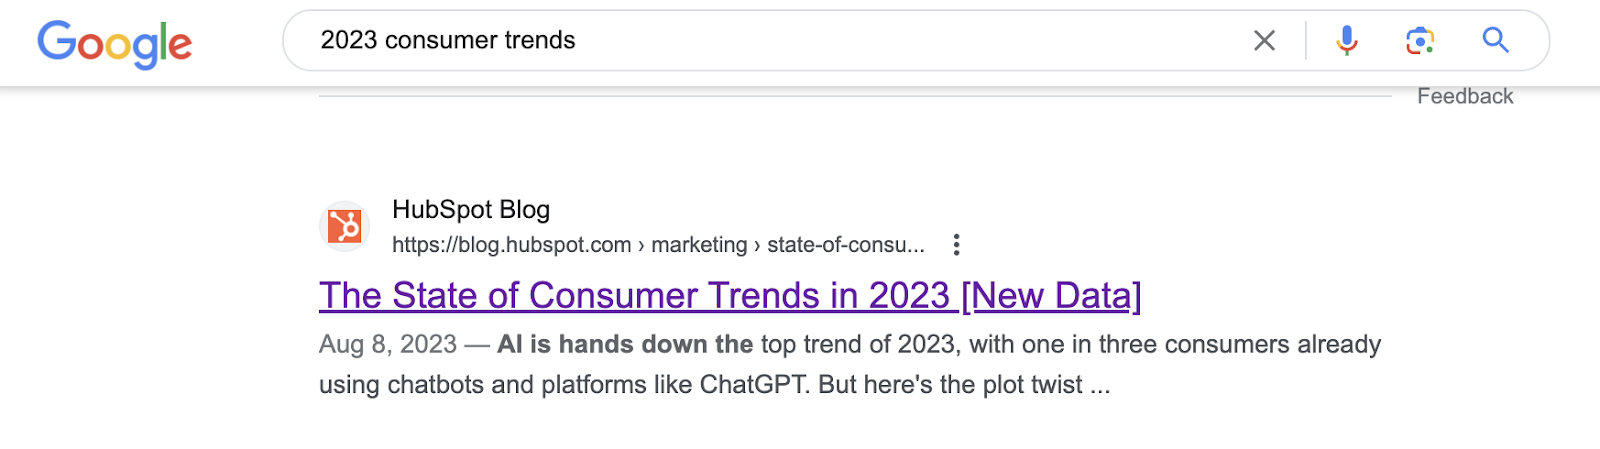 2023%20consumer%20trends.png?width=1600&height=449&name=2023%20consumer%20trends - 41 Types of Marketing Your Brand Should Invest In